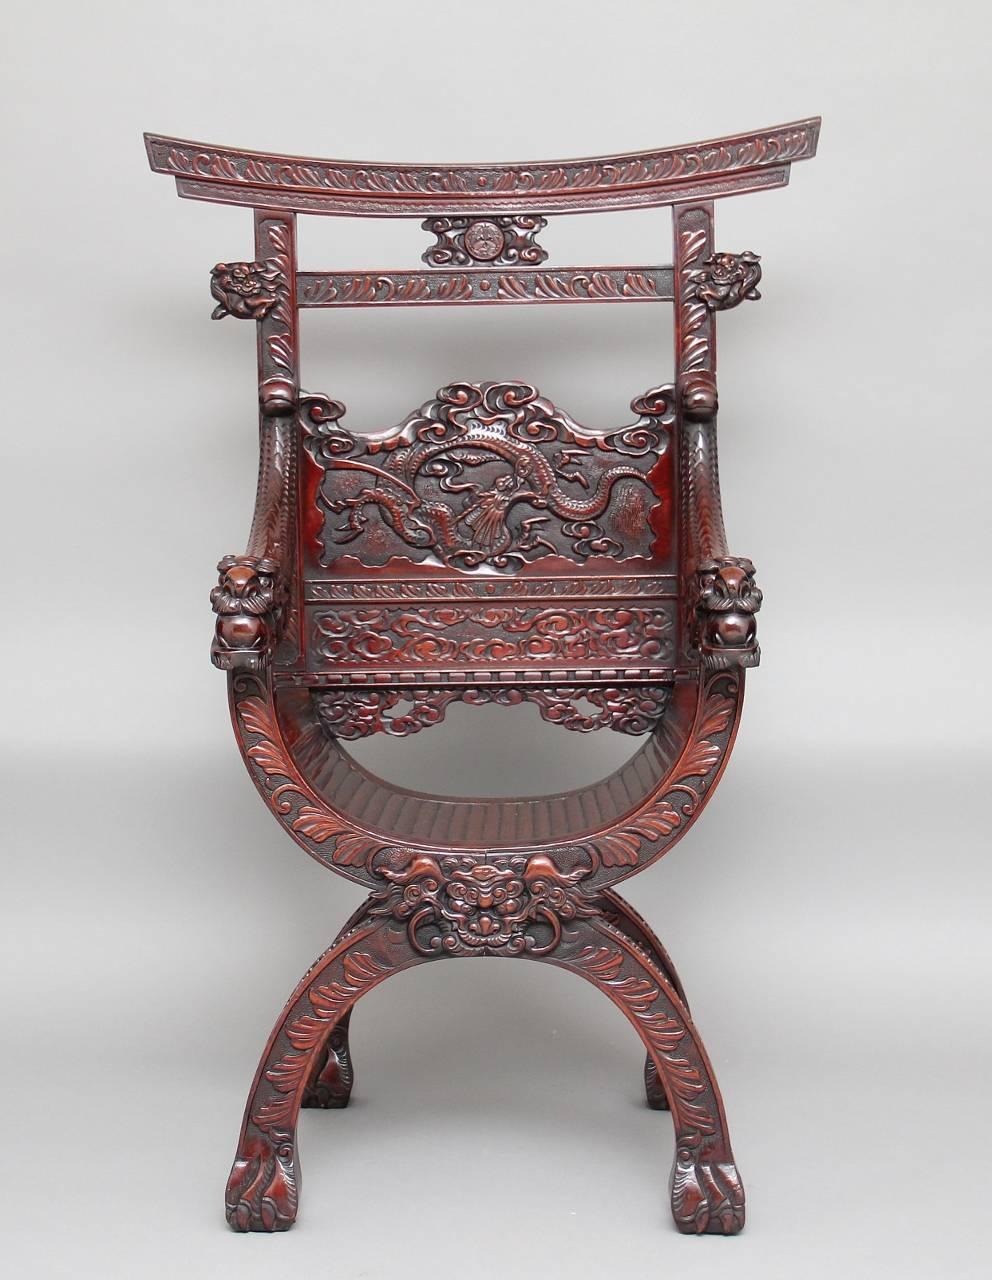 19th century Chinese throne/ armchair profusely carved all-over, the back panel decorated with a carved dragon and carved fret work below, with carved dragon arms united onto a curved seat, supported on a cross frame base standing on paw feet, circa